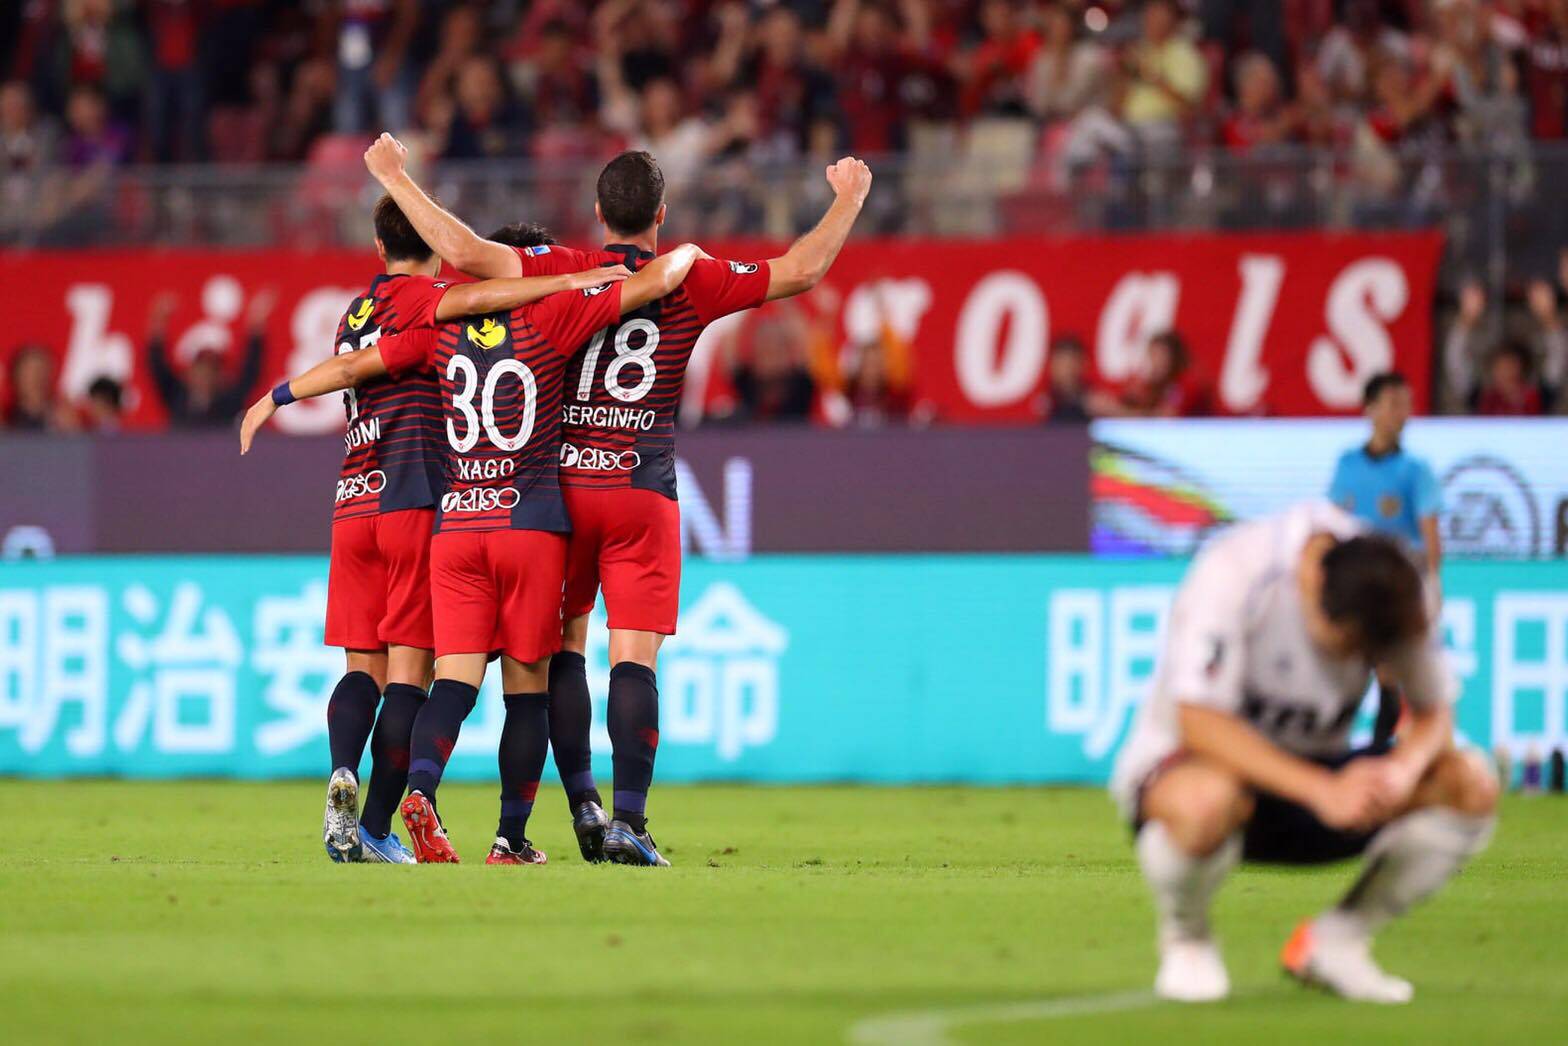 It’s Getting Tight as J-League Enters Final Stretch